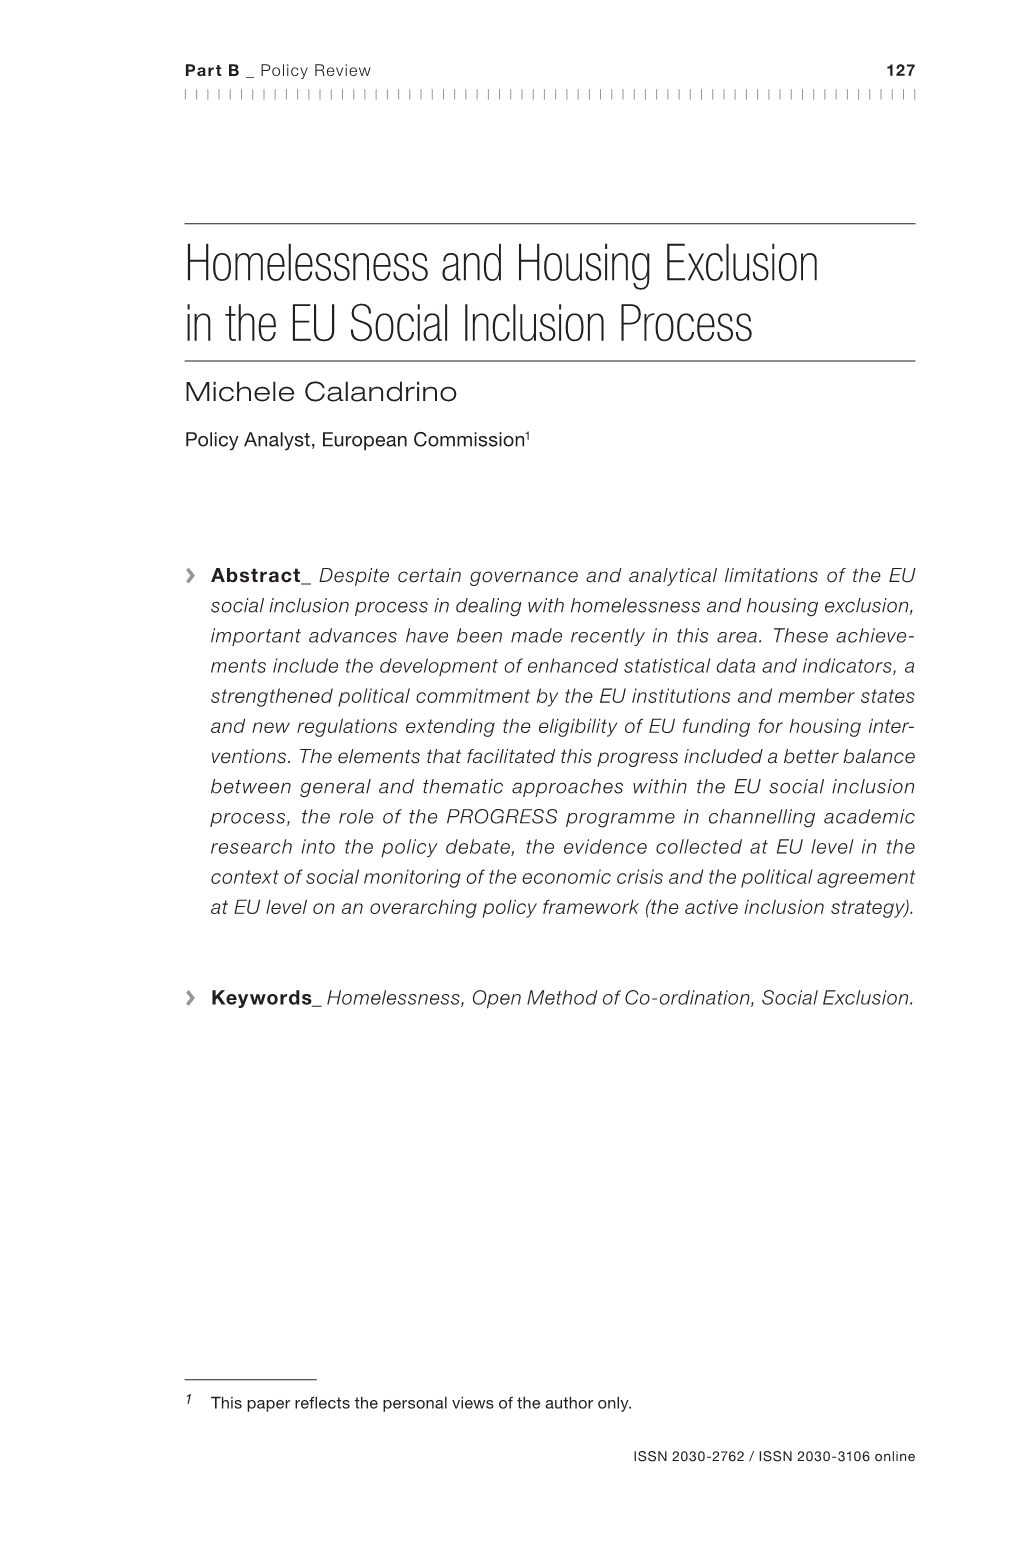 Homelessness and Housing Exclusion in the EU Social Inclusion Process